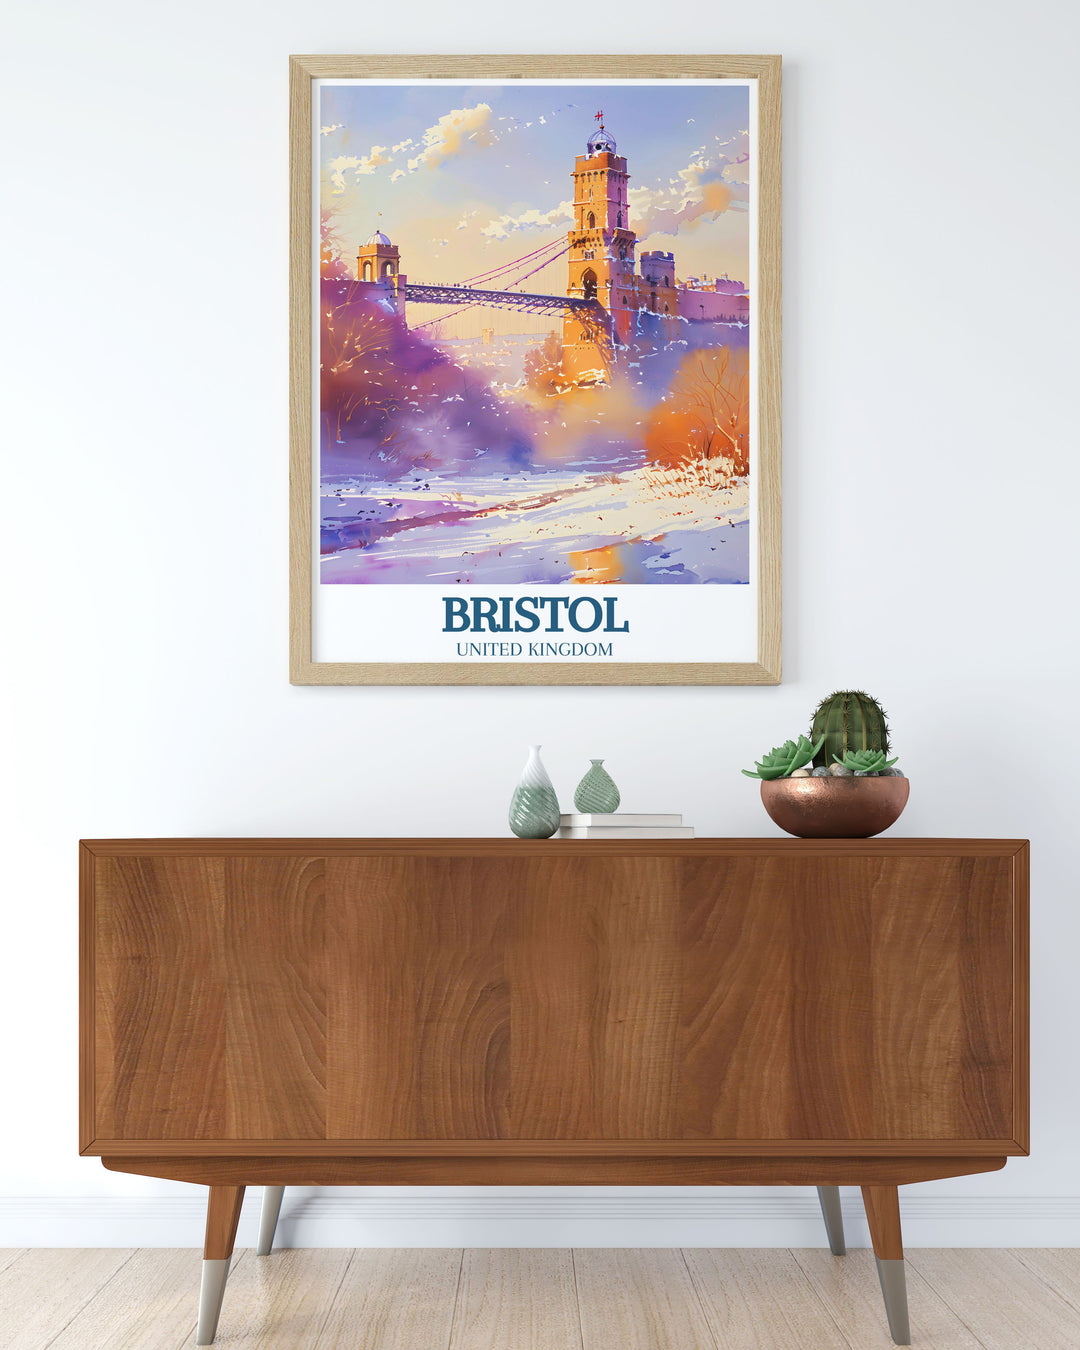 Experience the thrill of Nova Trail MTB with this Ashton Court Bristol print. Featuring the majestic Clifton suspension bridge River Avon, it is ideal for mountain biking fans. A stunning addition to any wall, celebrating adventure and architectural beauty.